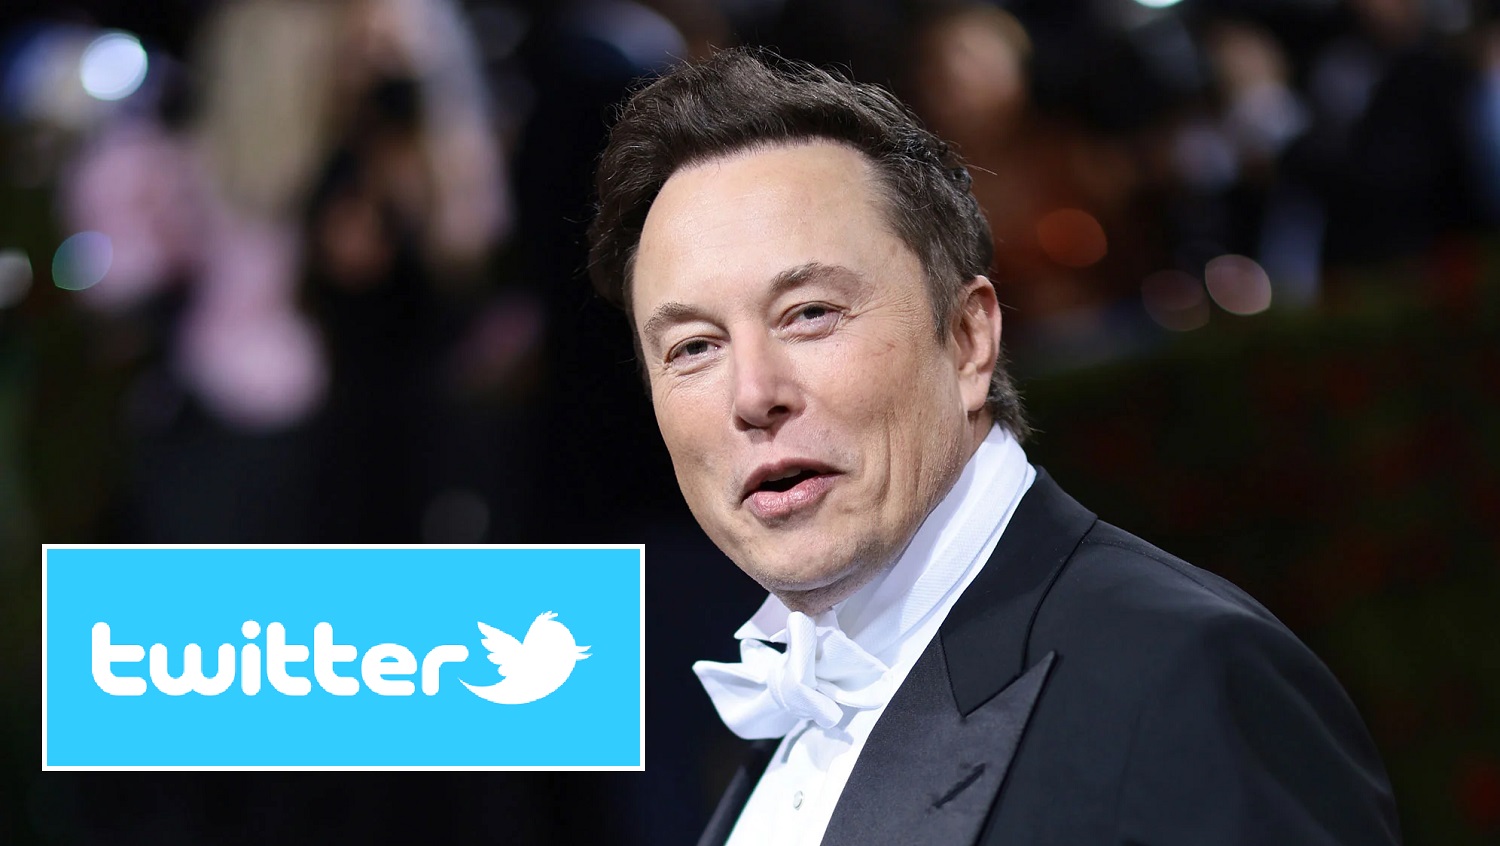 Elon Musk again wants to buy Twitter for $44 billion - the company's shares soared more than 20%